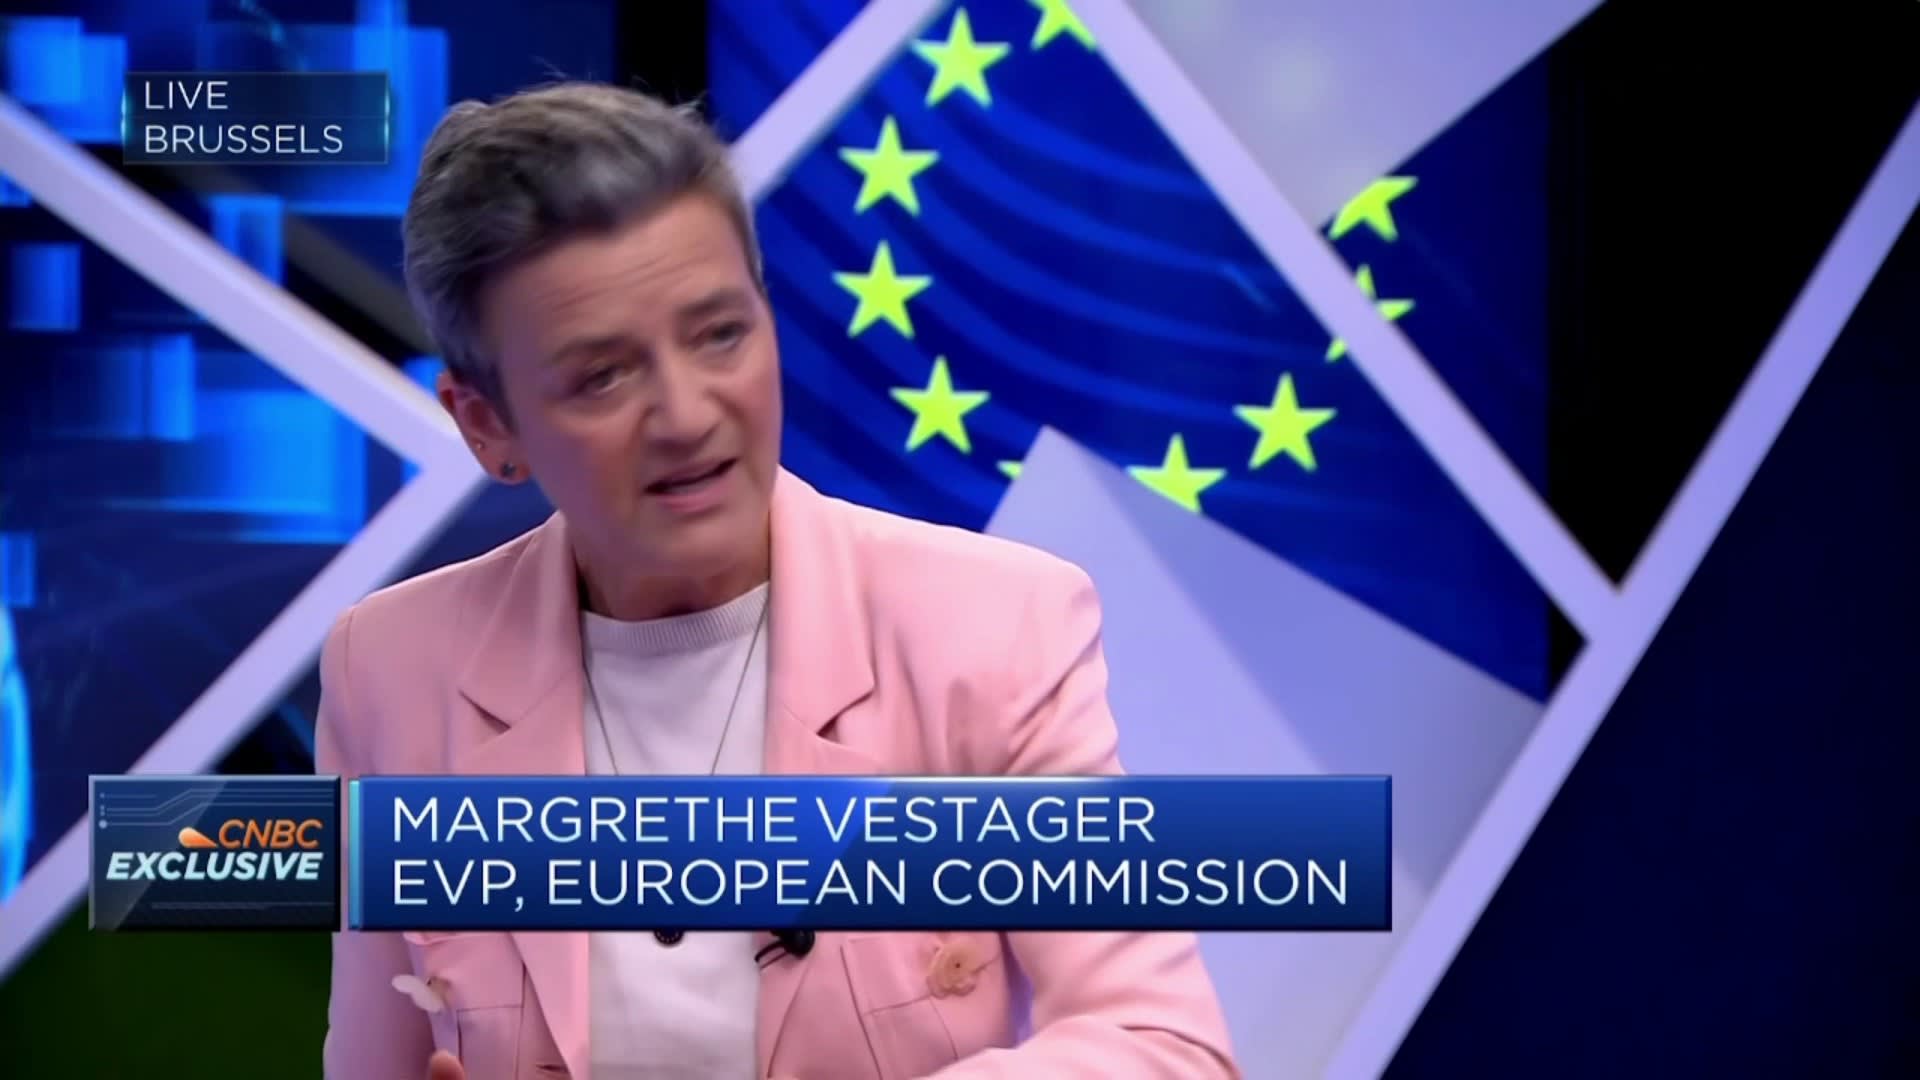 Watch CNBC's full interview with the EU's Margrethe Vestager